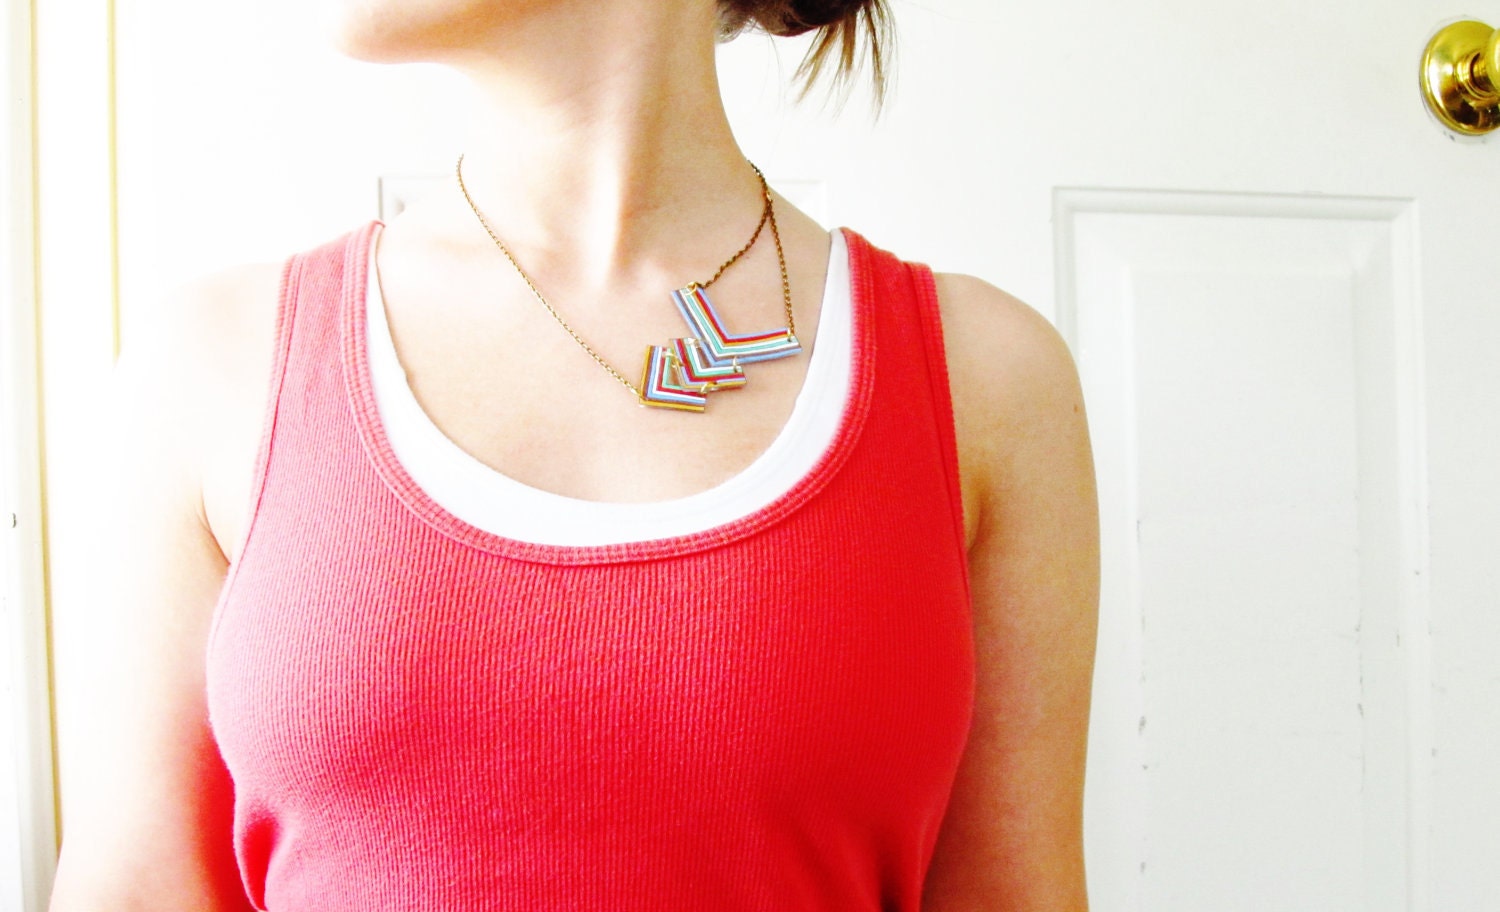 Striped Chevron Necklace / Shrink Plastic Necklace / Off Centered / Three Arrows / Rainbow Striped / Wearable Art - PeriwinkleNuthatch